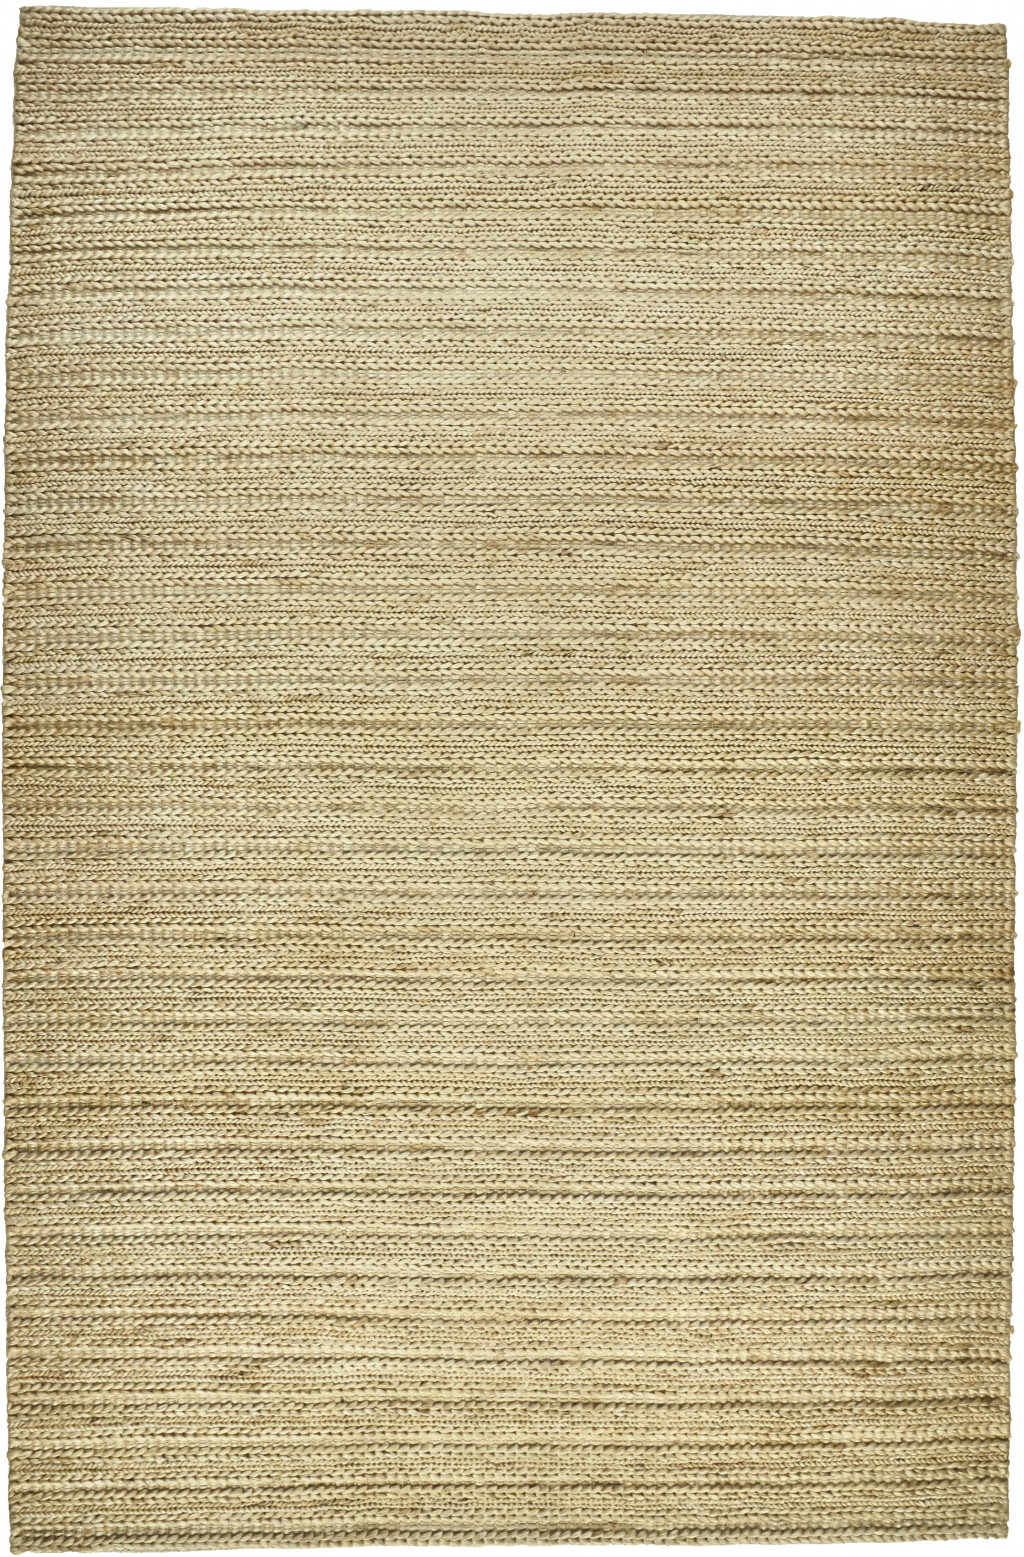 8' X 11' Tan Ivory And Taupe Hand Woven Area Rug-511422-1